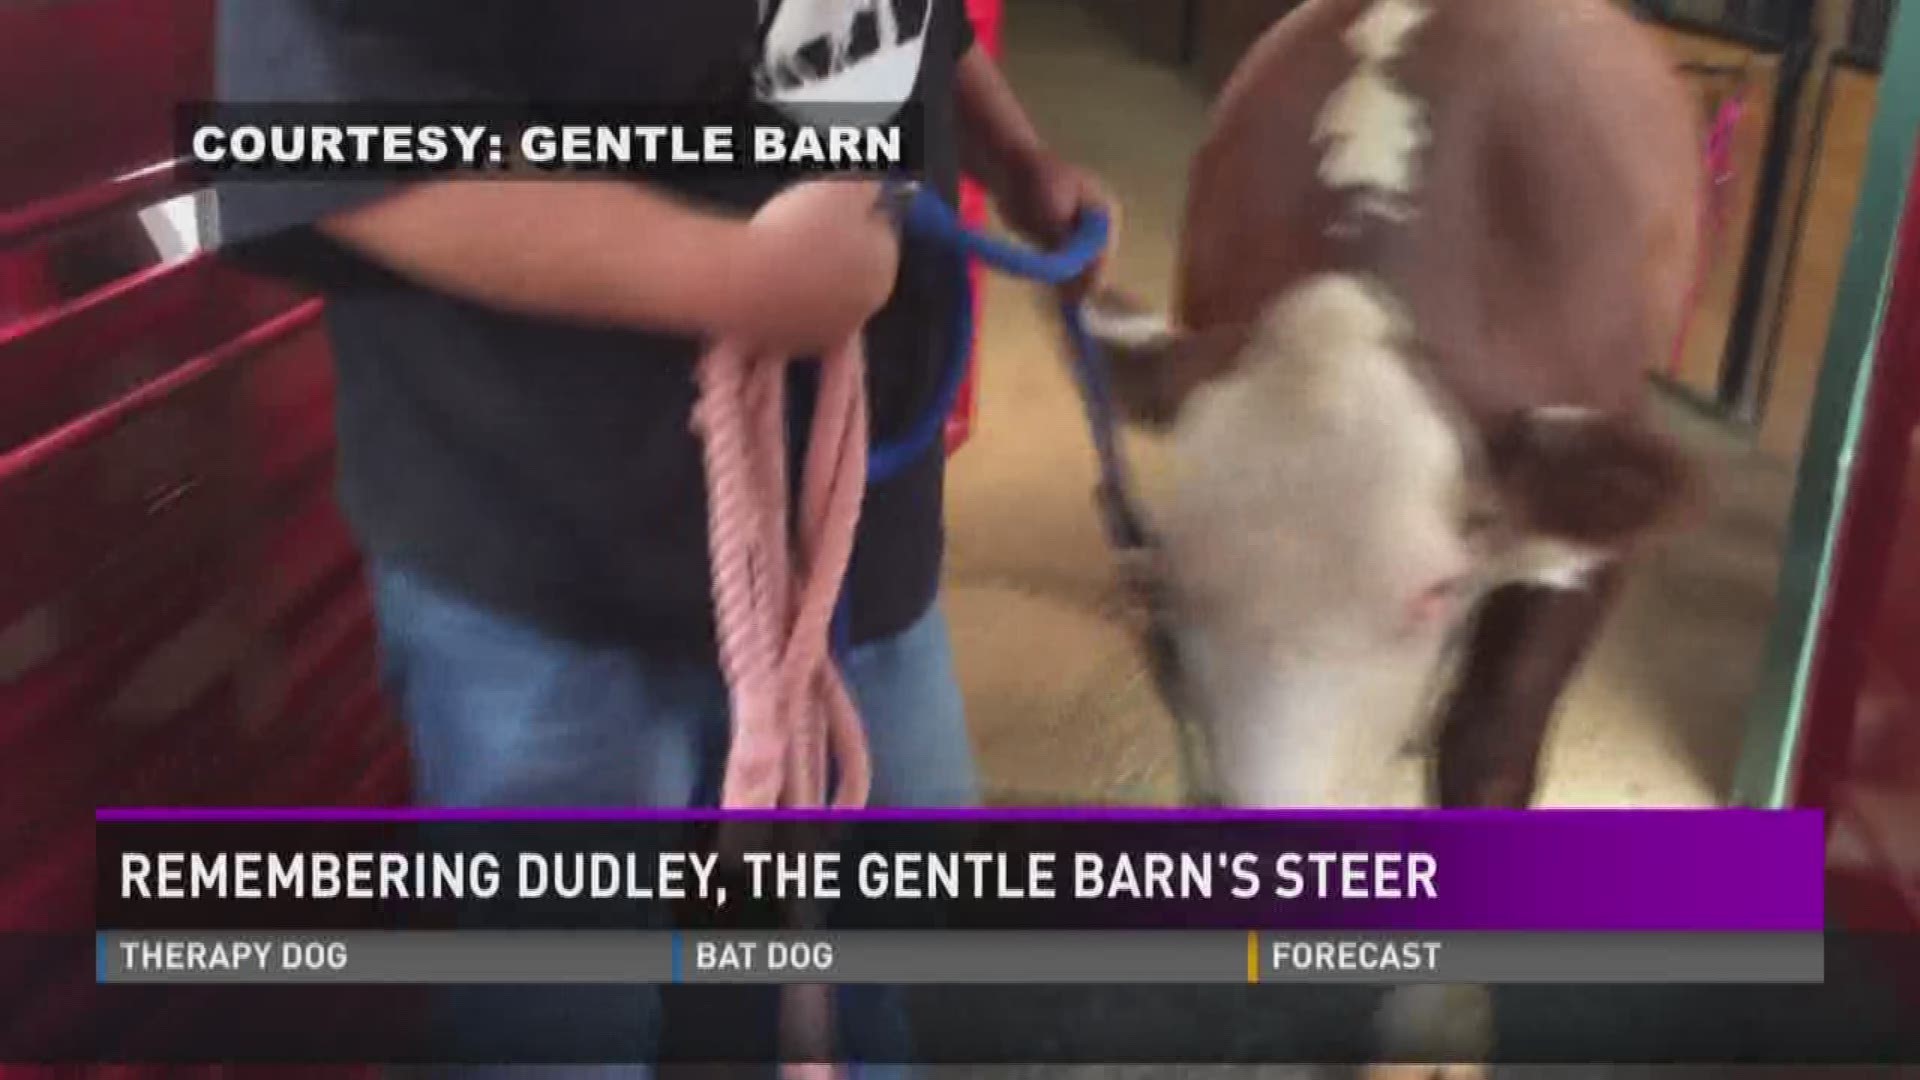 Dudley was well known because of his prosthetic leg. The rescued steer died earlier this week from a  medical issue.